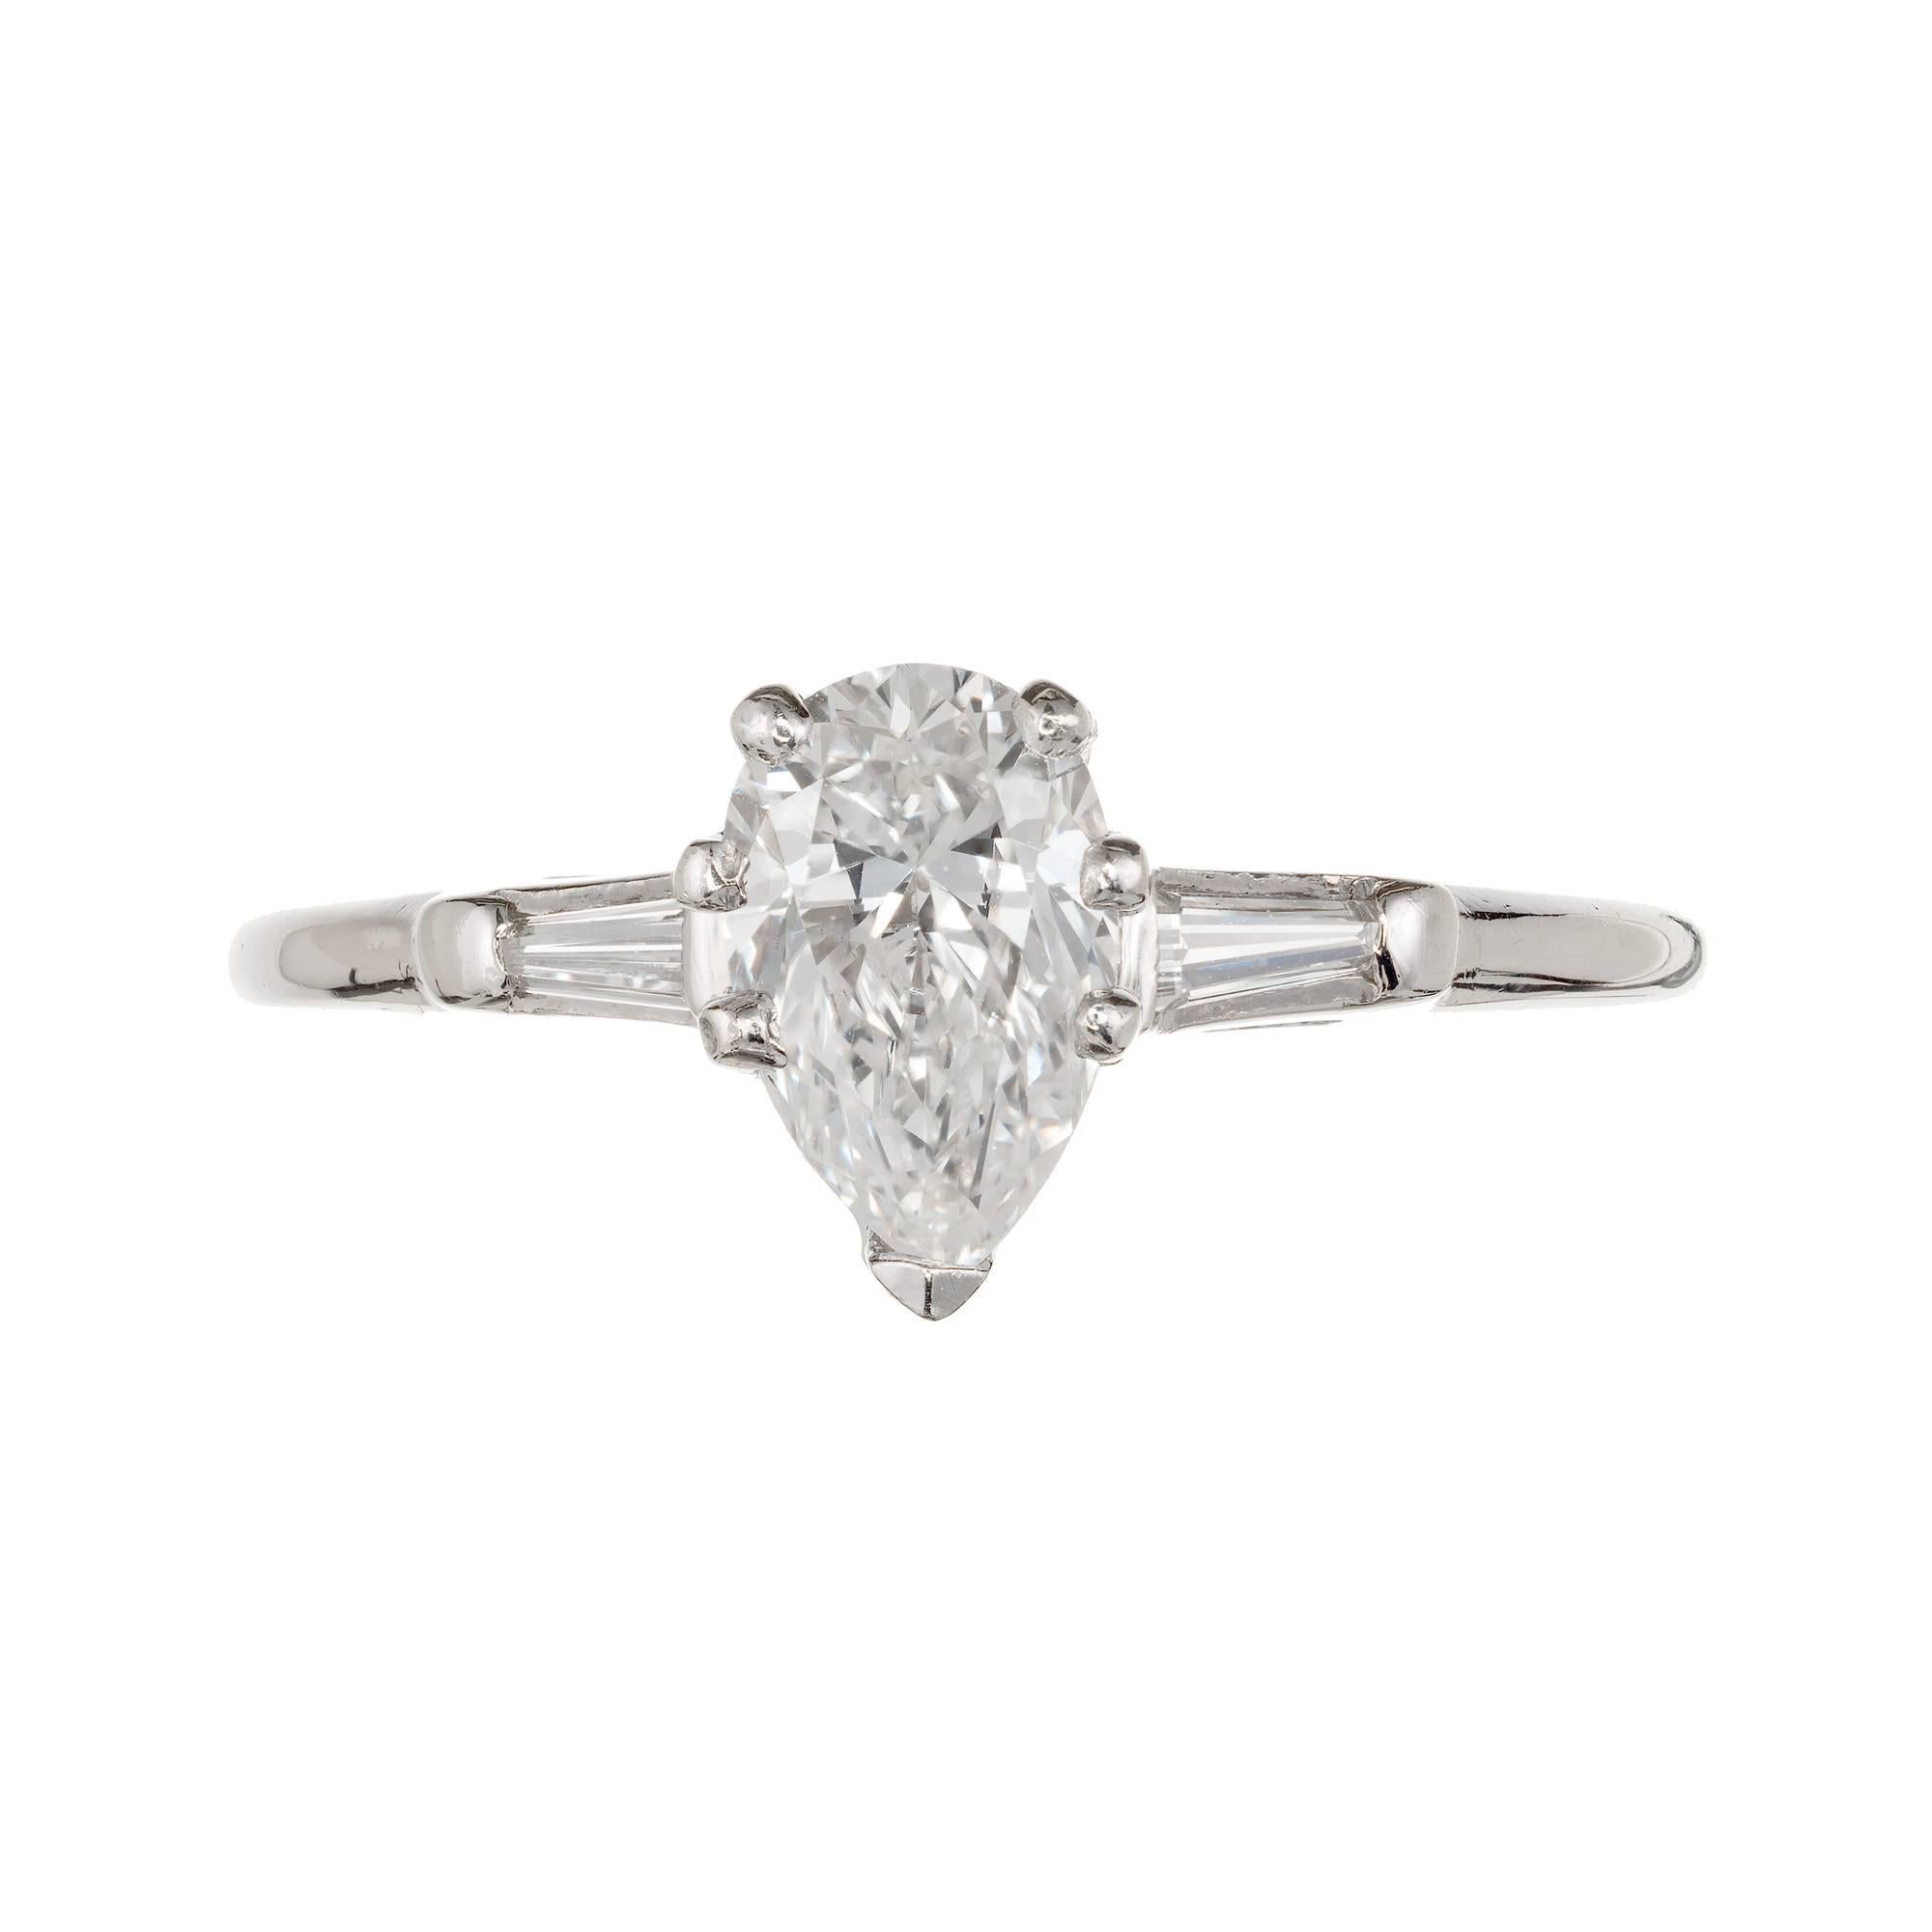 EGL certified 1960s pear shaped diamond three-stone engagement ring with tapered baguette side diamonds in a 14k white gold setting.

1 pear shaped diamond, approx. total weight .58cts, F – G,   VS1 EGLCert# US 313341601D
2 tapered baguette